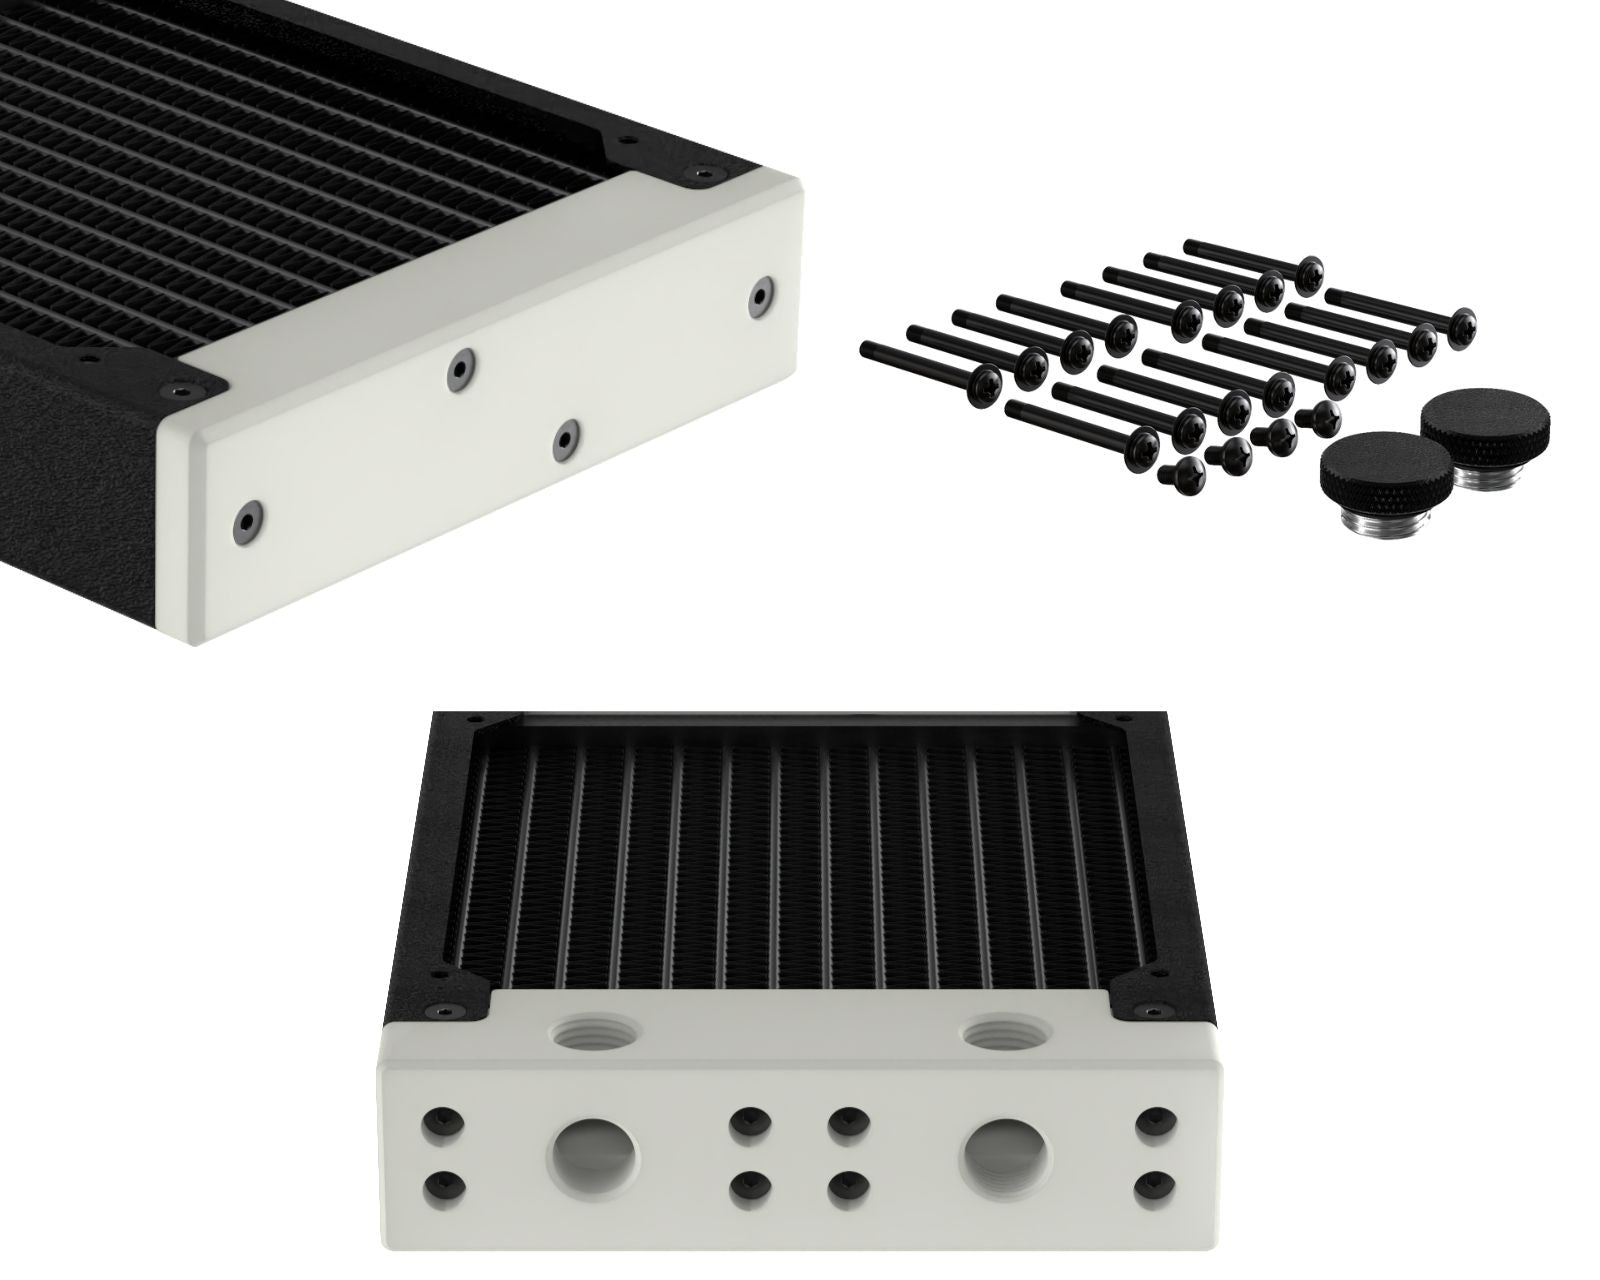 PrimoChill 480SL (30mm) EXIMO Modular Radiator, White POM, 4x120mm, Quad Fan (R-SL-W48) Available in 20+ Colors, Assembled in USA and Custom Watercooling Loop Ready - TX Matte Black